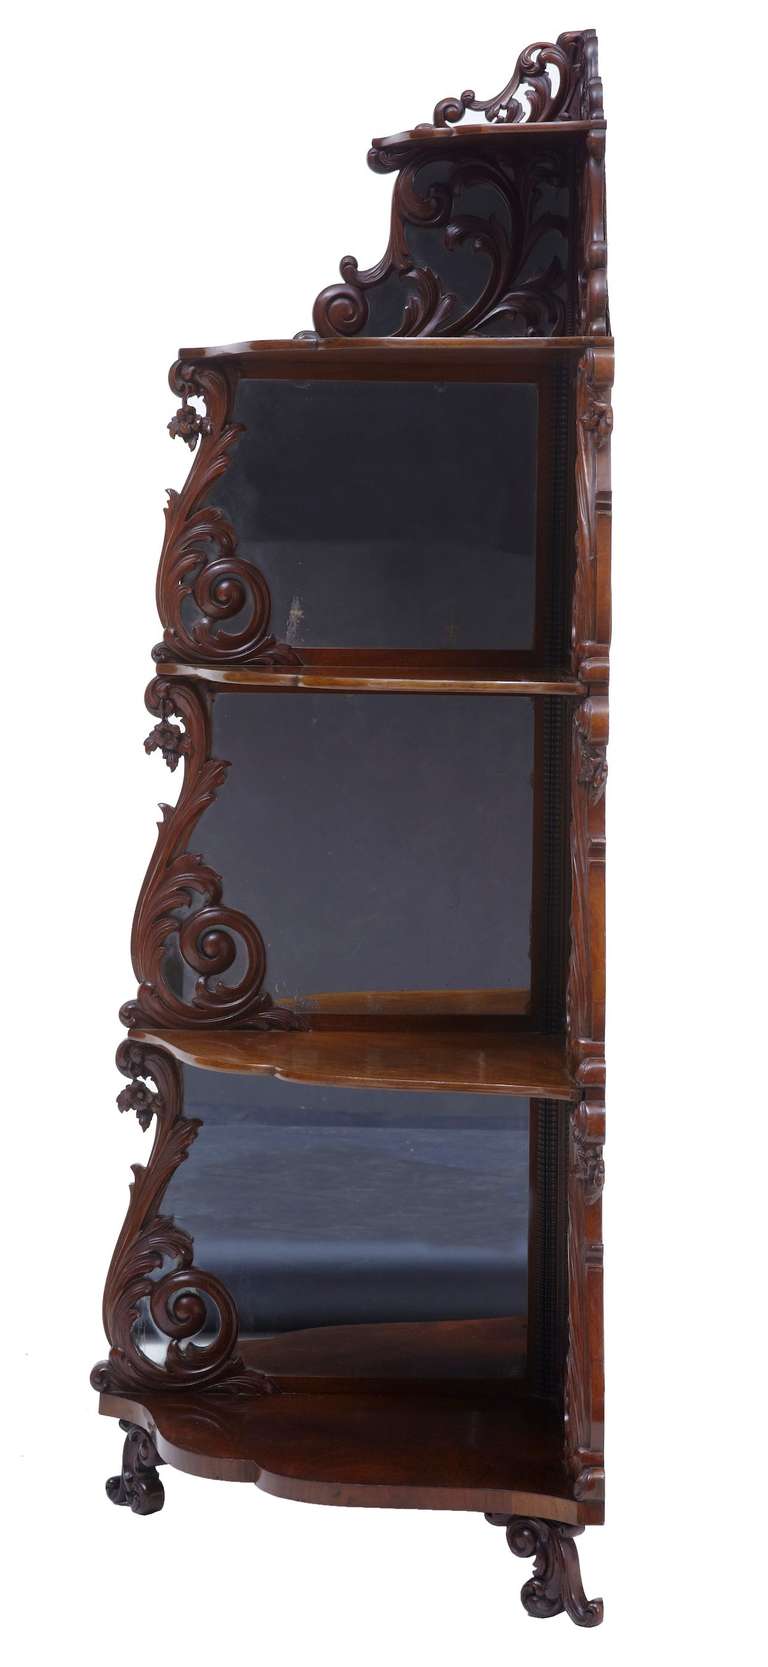 19th century carved mahogany Victorian whatnot

Good quality five-tier carved mahogany what not with mirrored back panels.